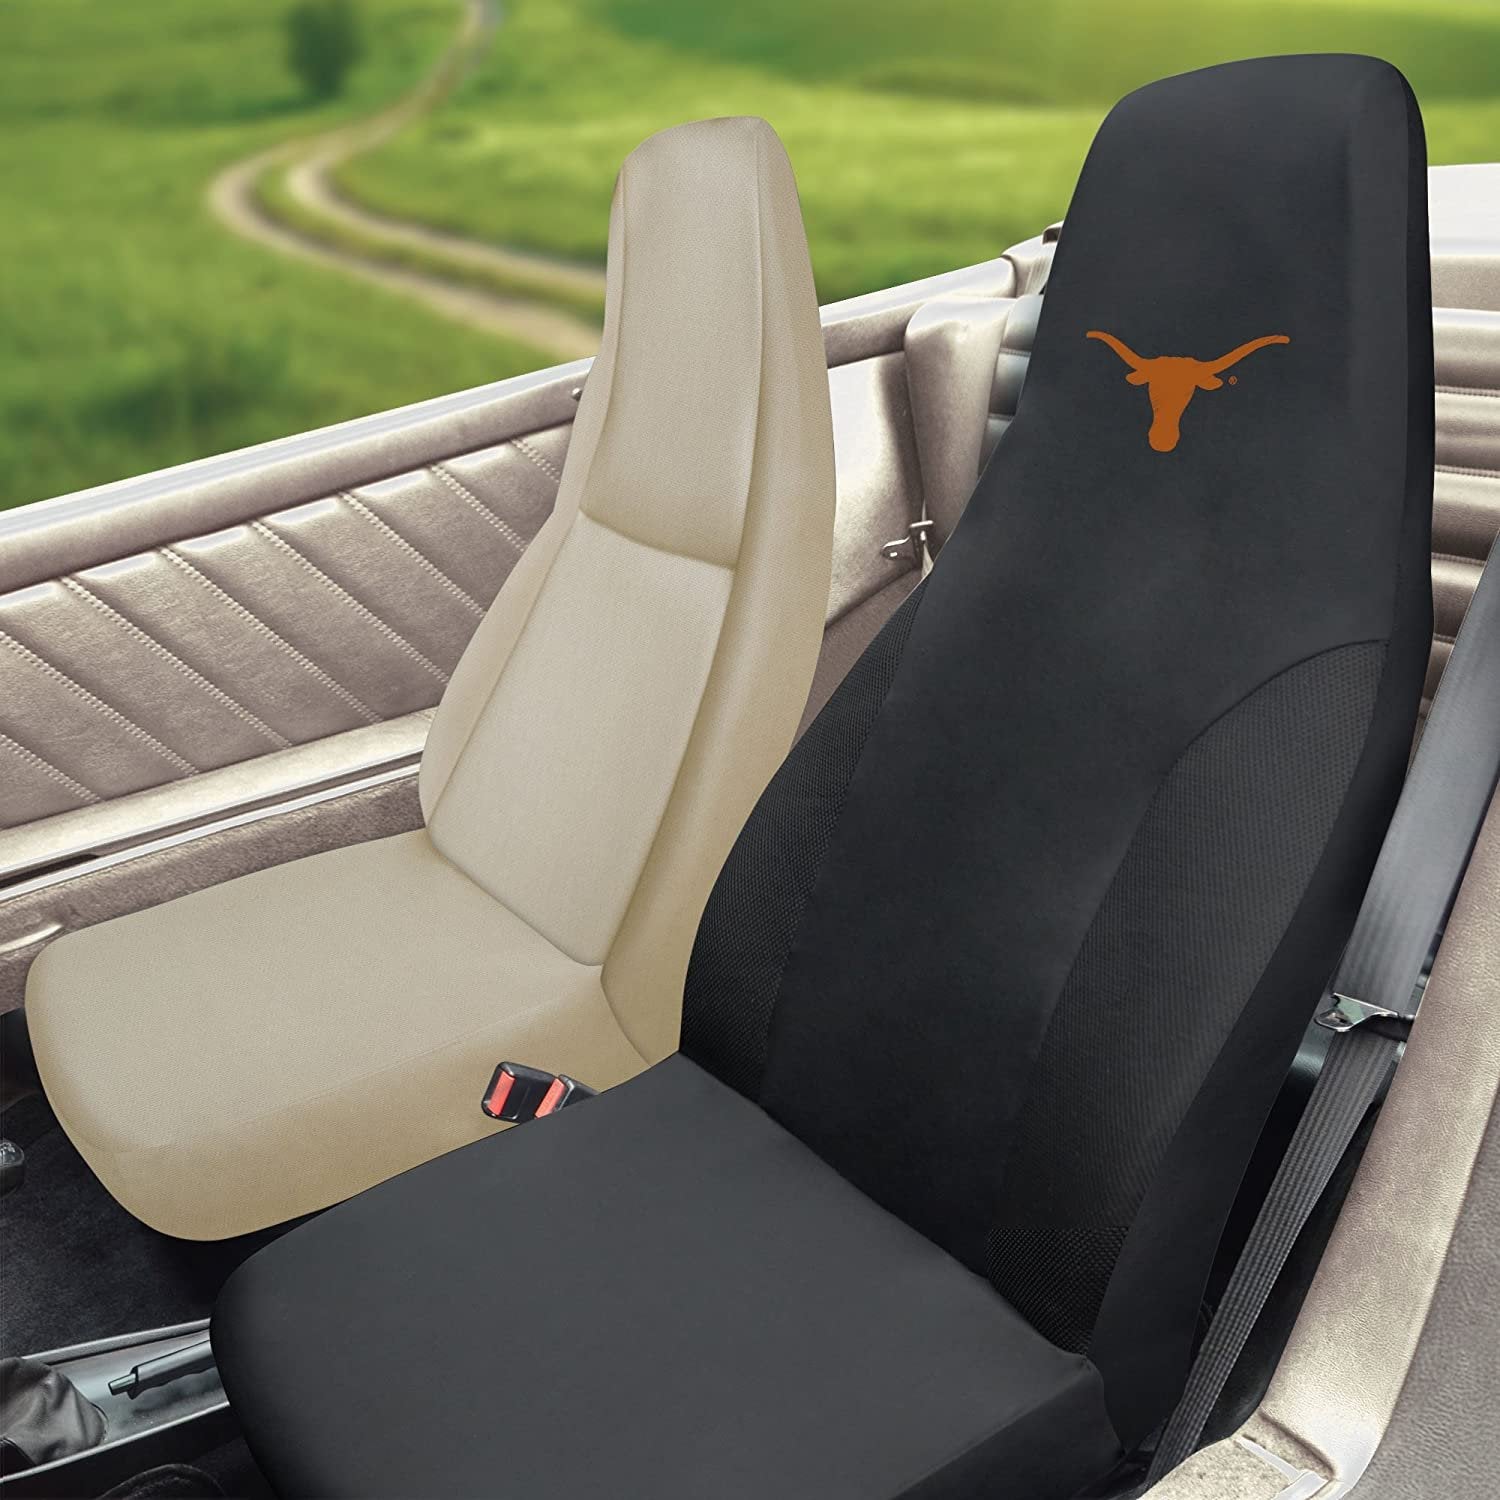 FANMATS - 14997 NCAA University of Texas Longhorns Polyester Seat Cover,20"x48"